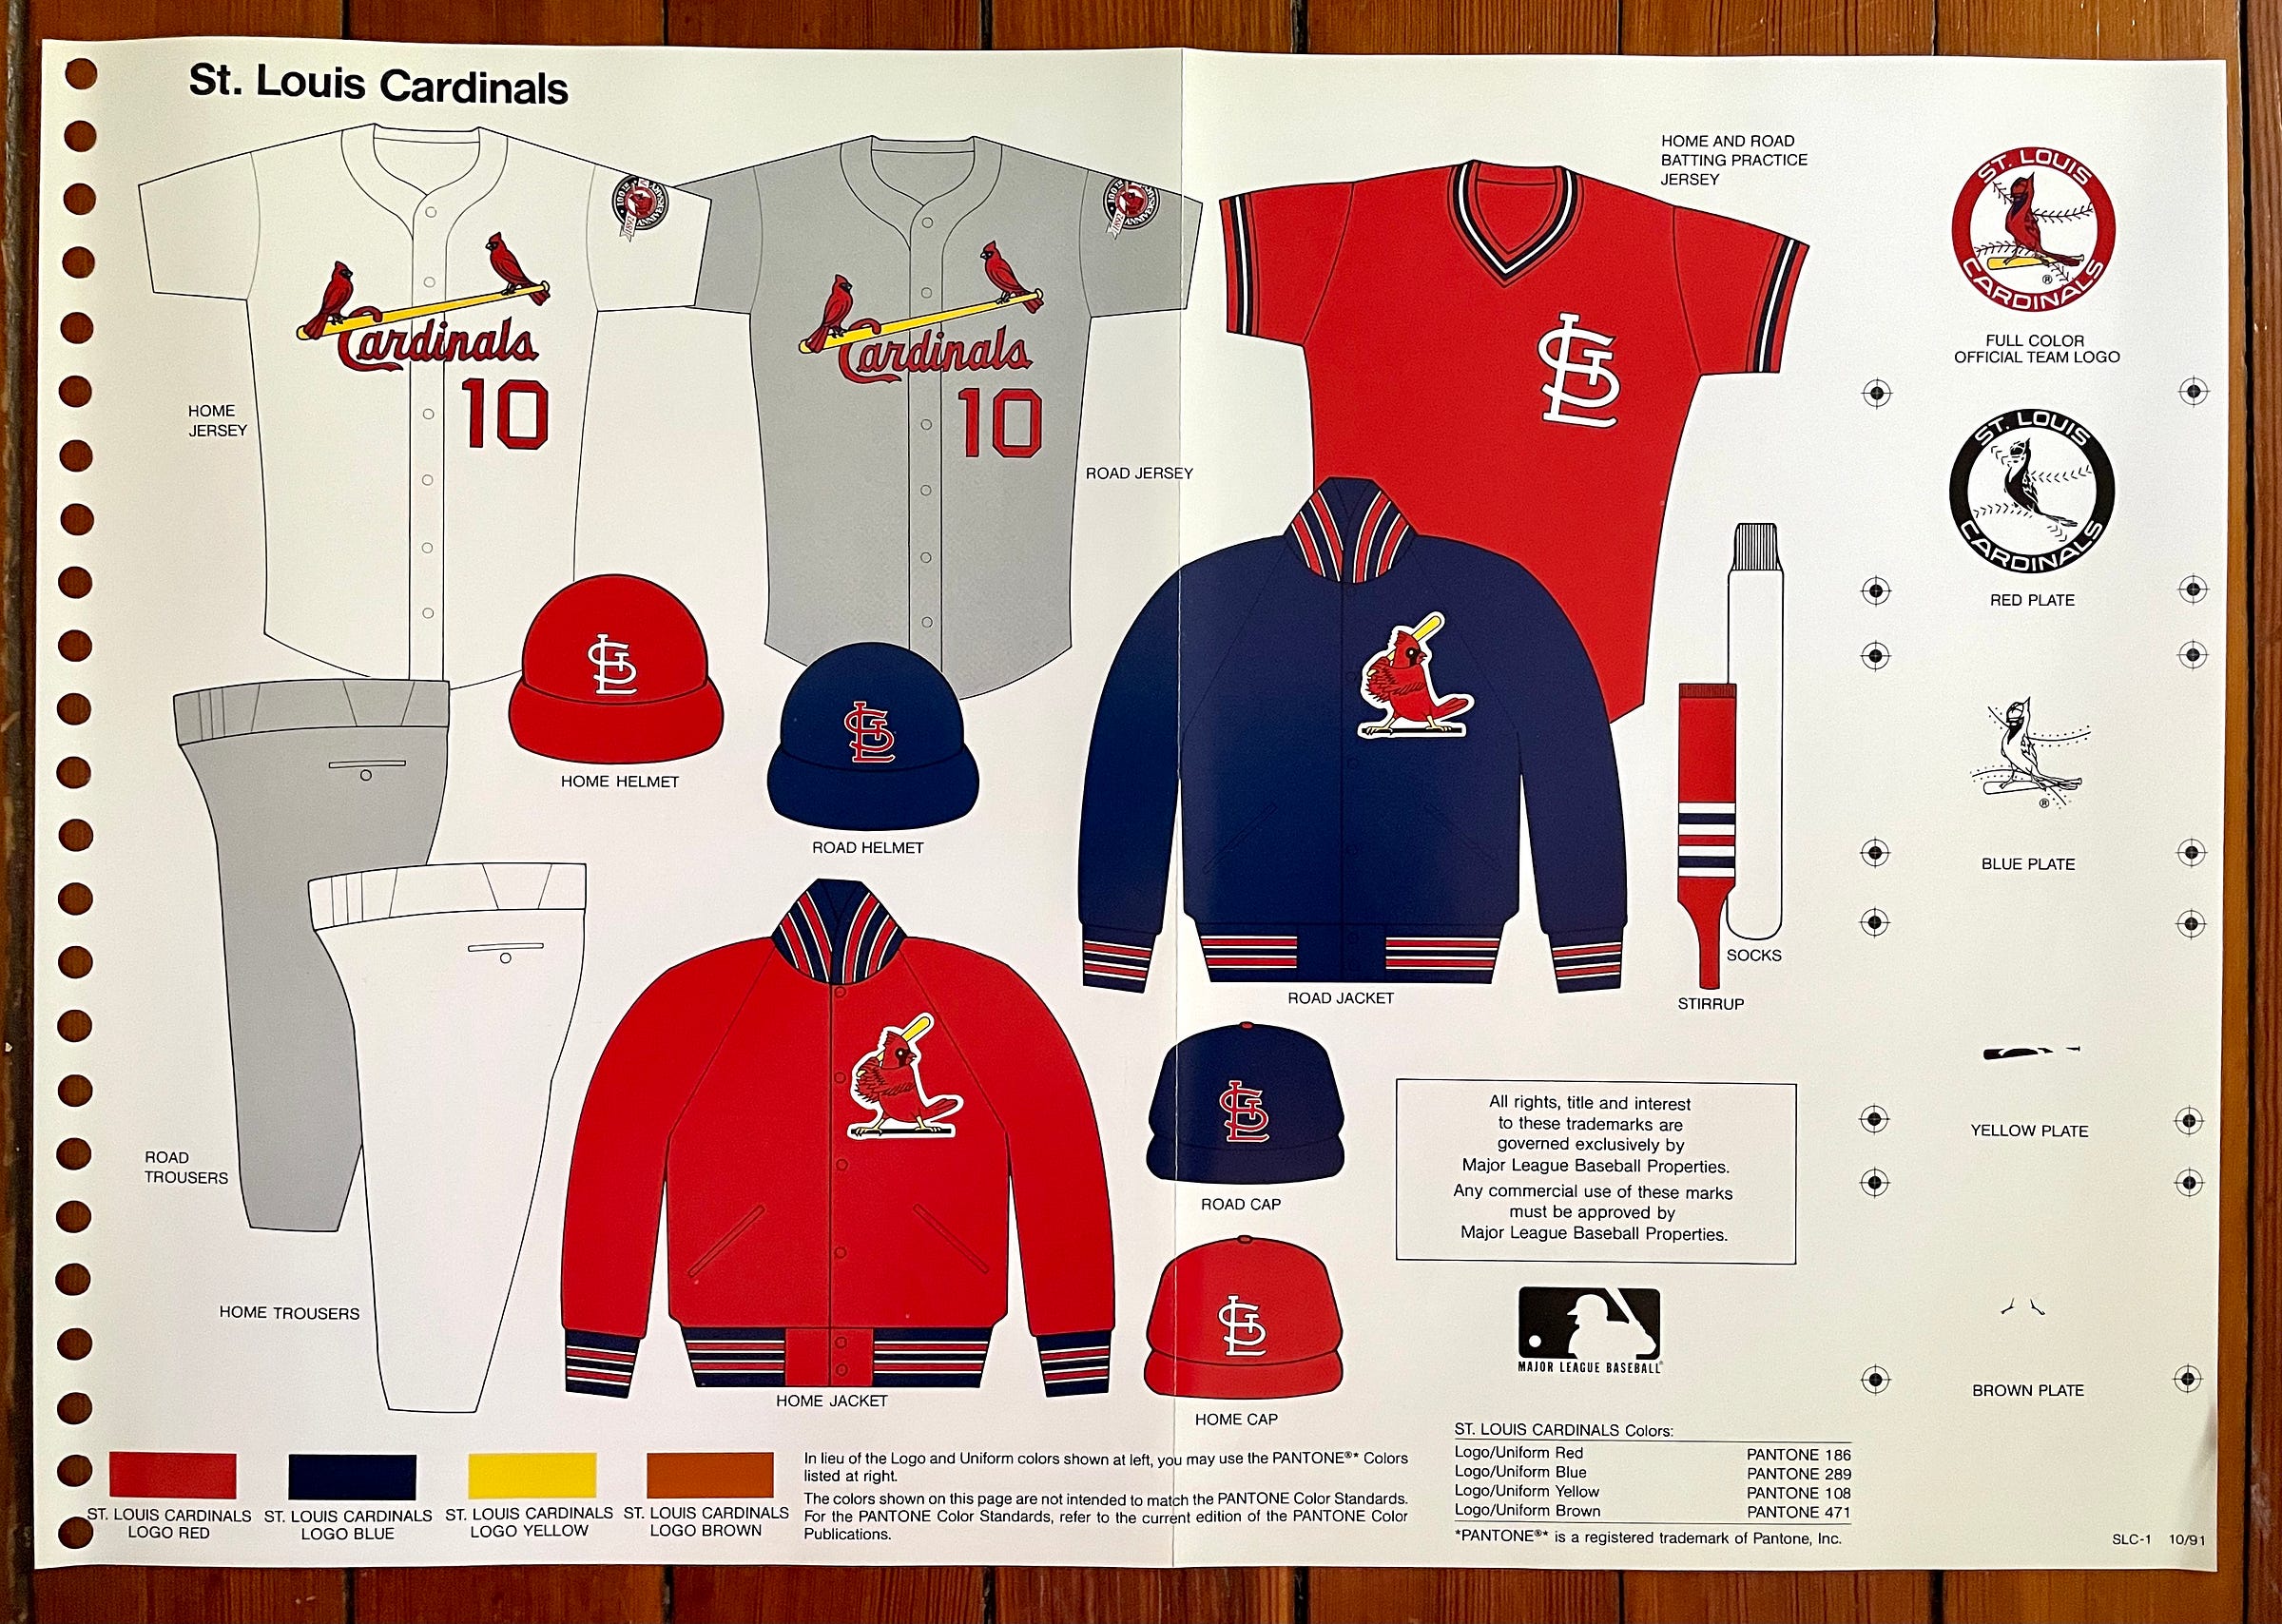 A closer look at the uniforms and logos of the 90s